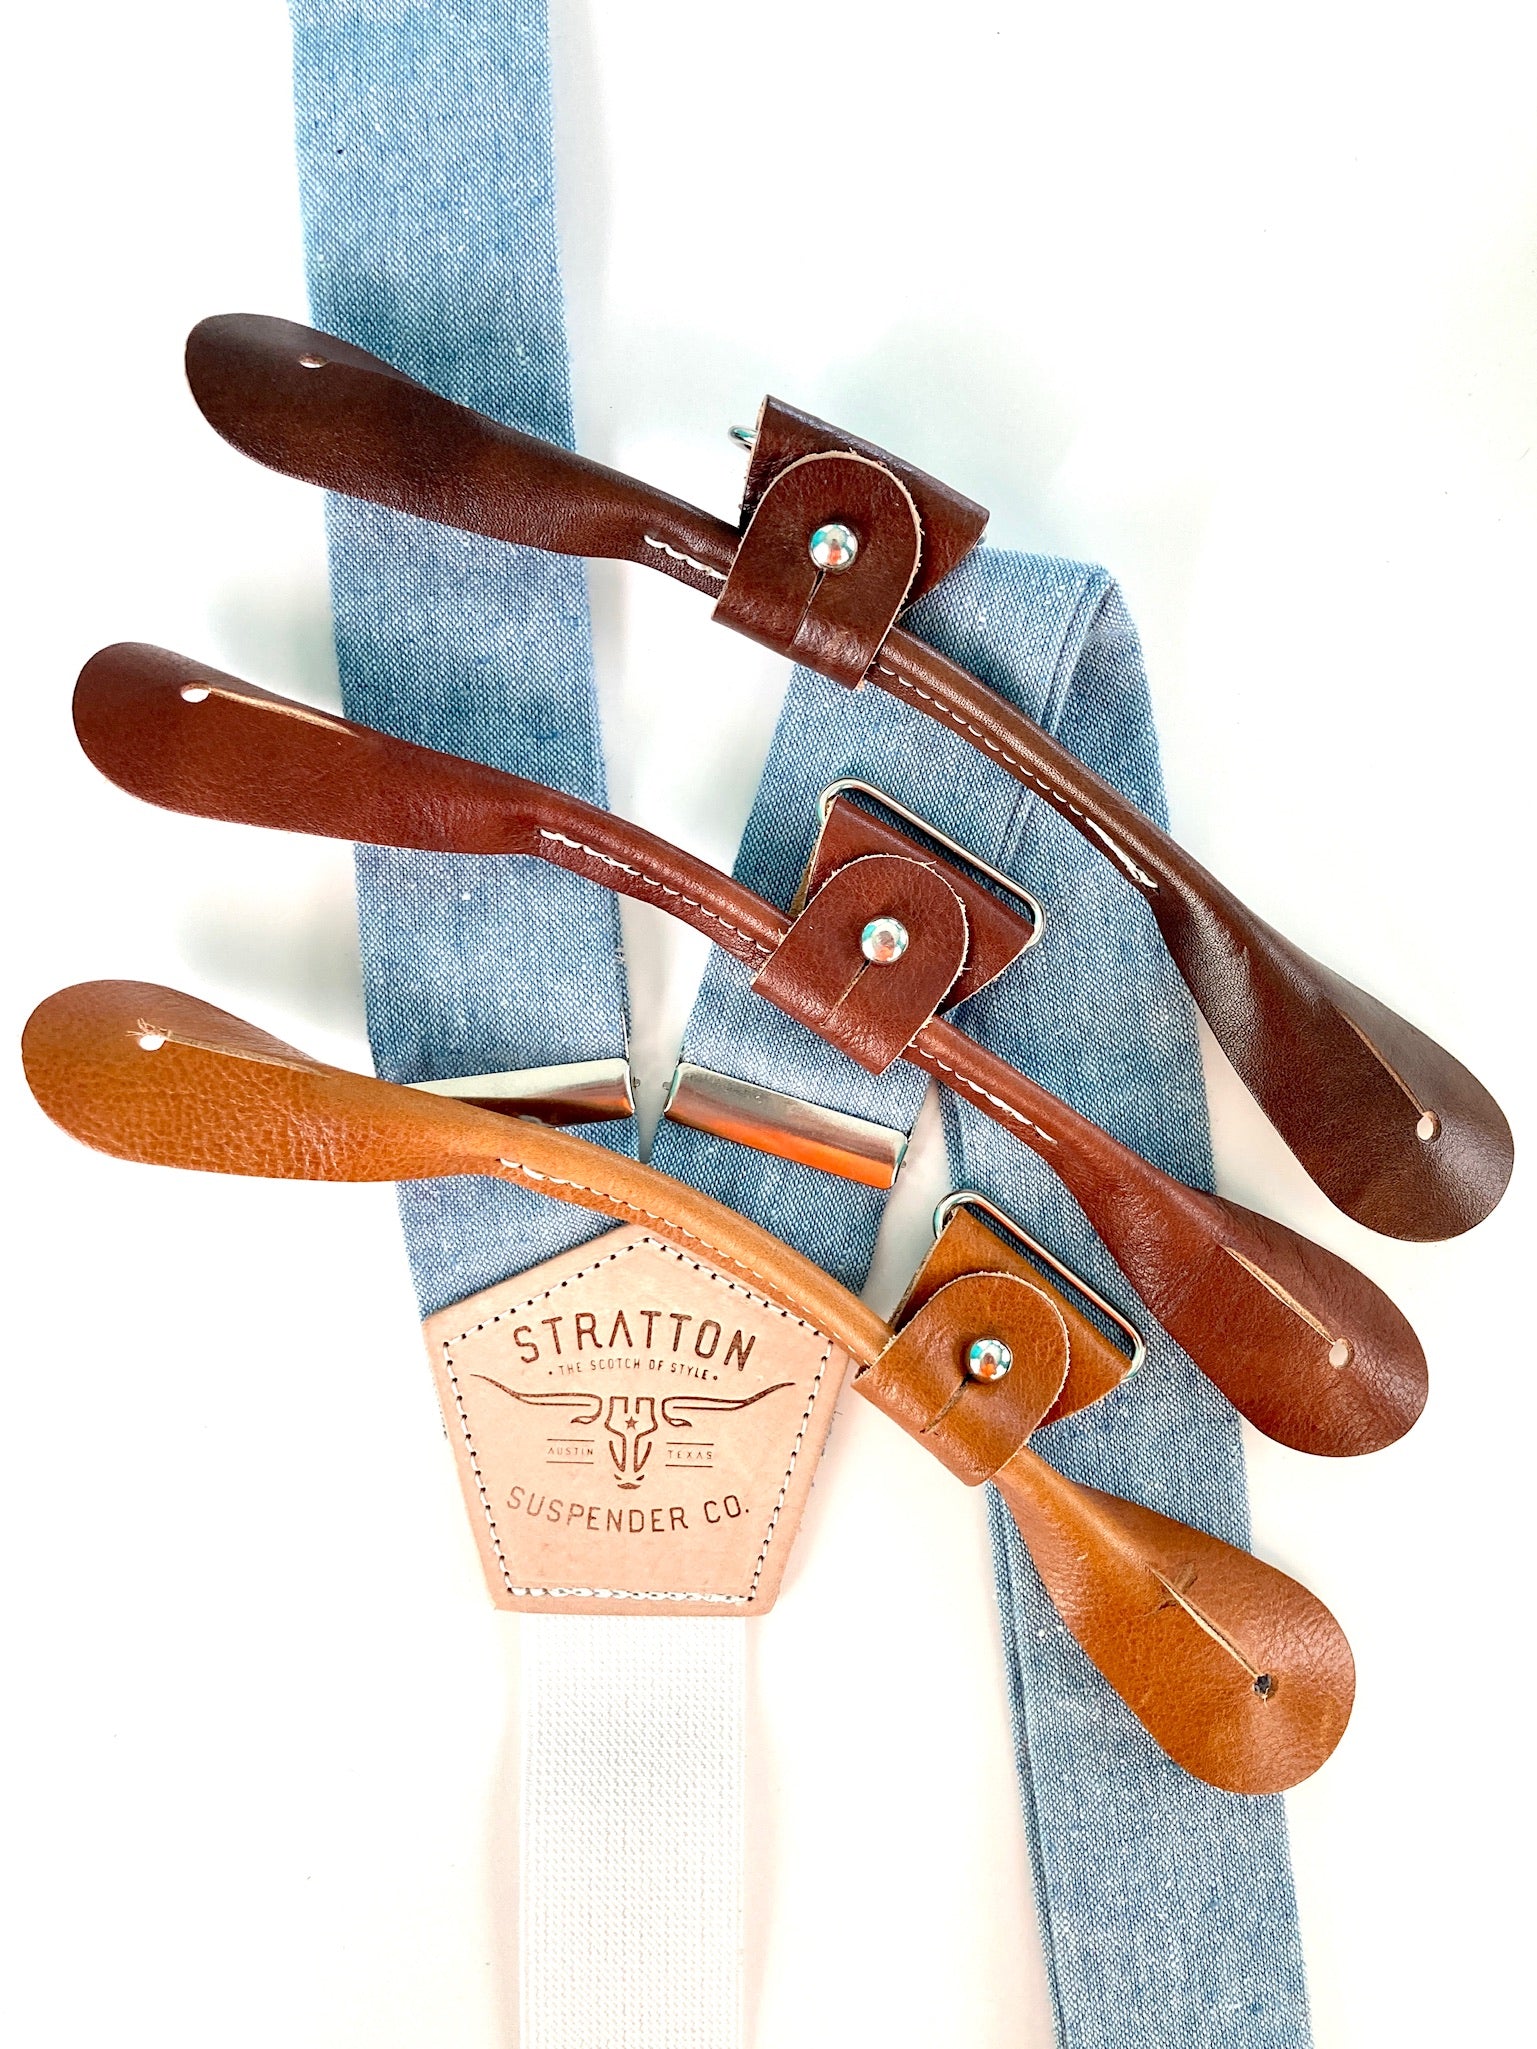 Stratton Suspender Co. Button On Set in Frio River Blue Linen featuring Tan, Cognac, Chocolate, and Black Italian Pontedero Leather